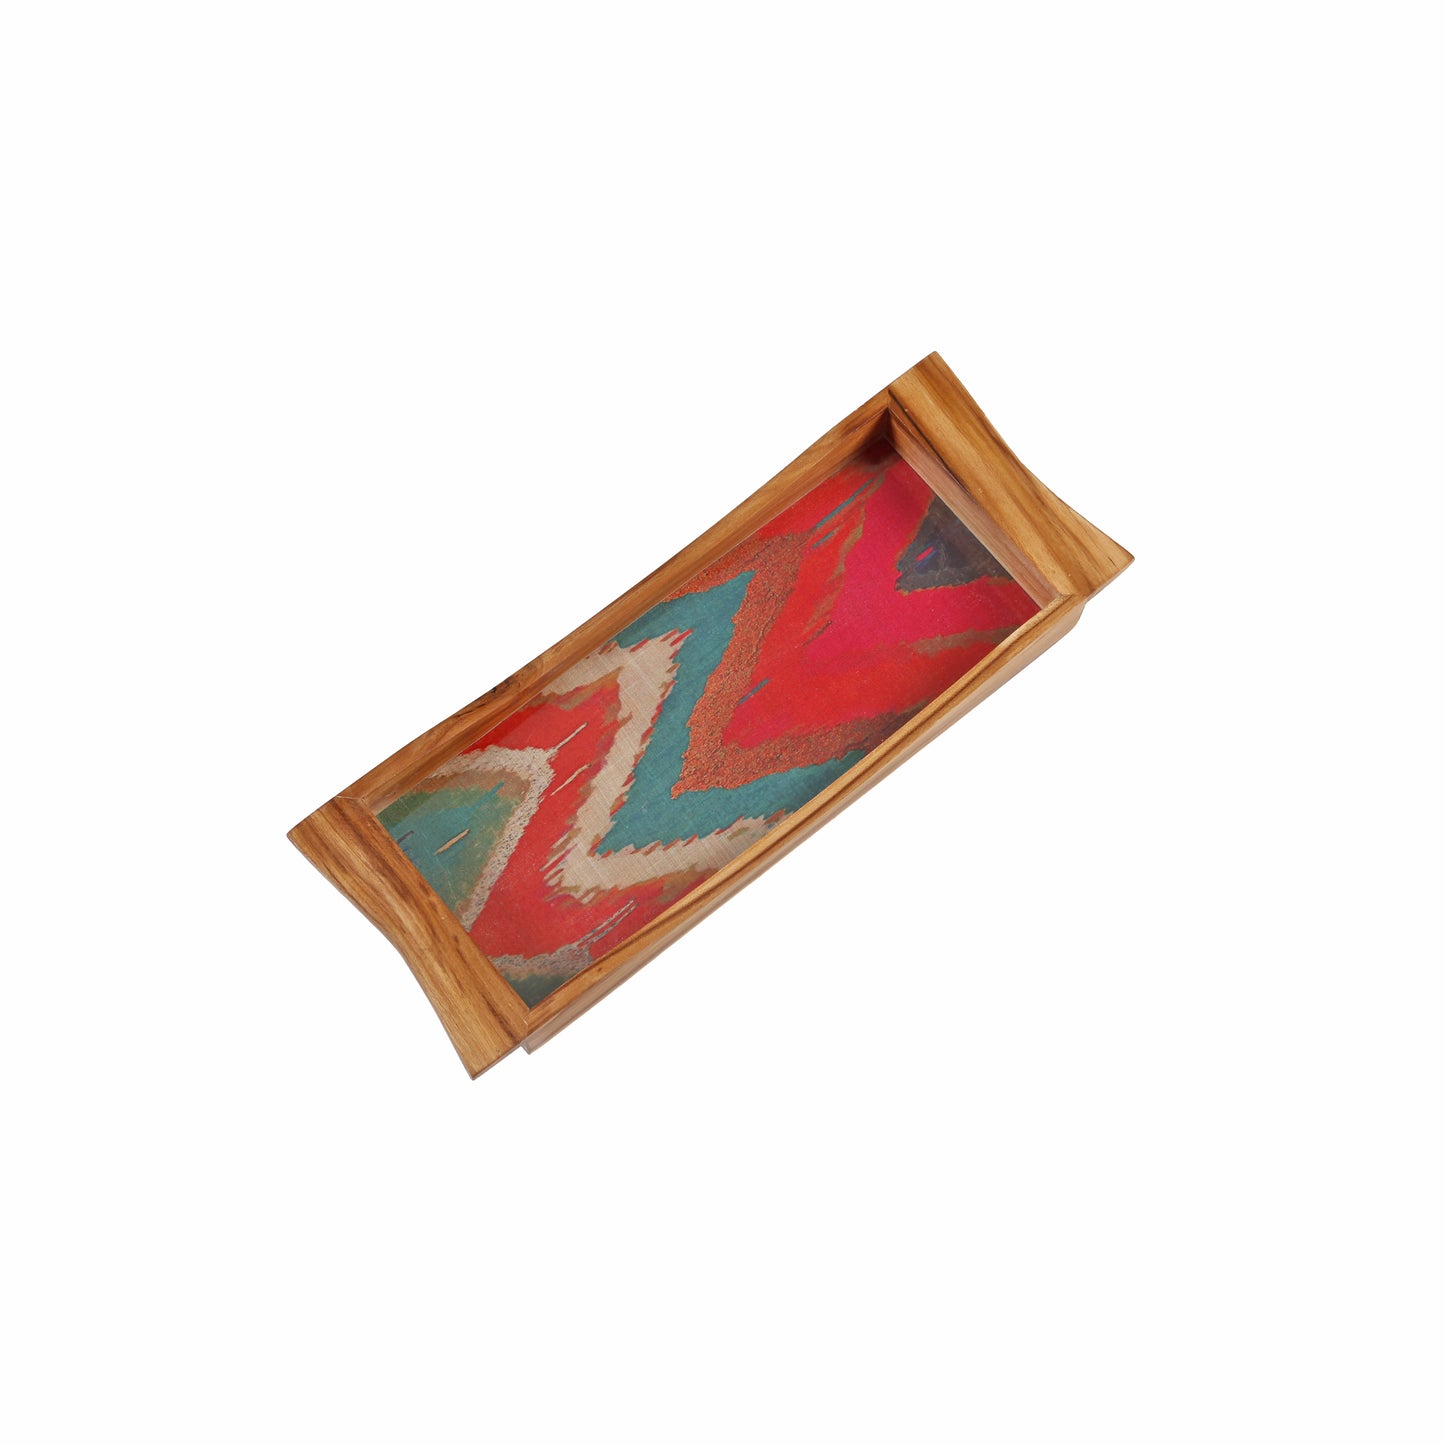 A Tiny Mistake Vibrant Ikat Print Boat Shaped Teak Serving Tray, Tray for Serving Tea and Snacks, 35 x 15 x 4 cm